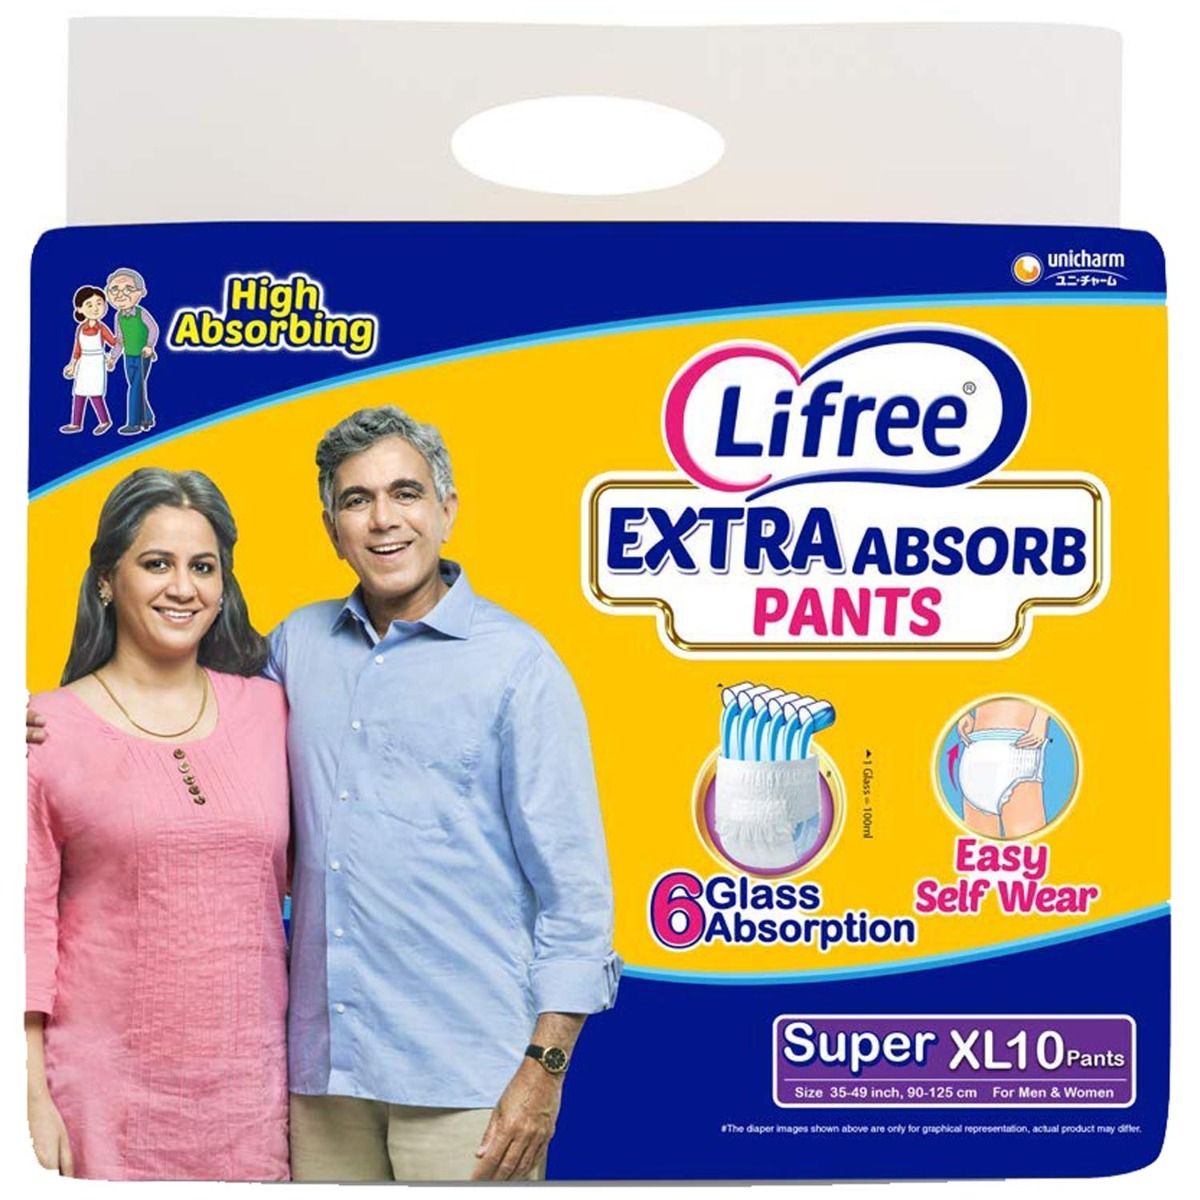 Buy Lifree Extra Absorbent Adult Diaper Pants XL, 10 Count Online